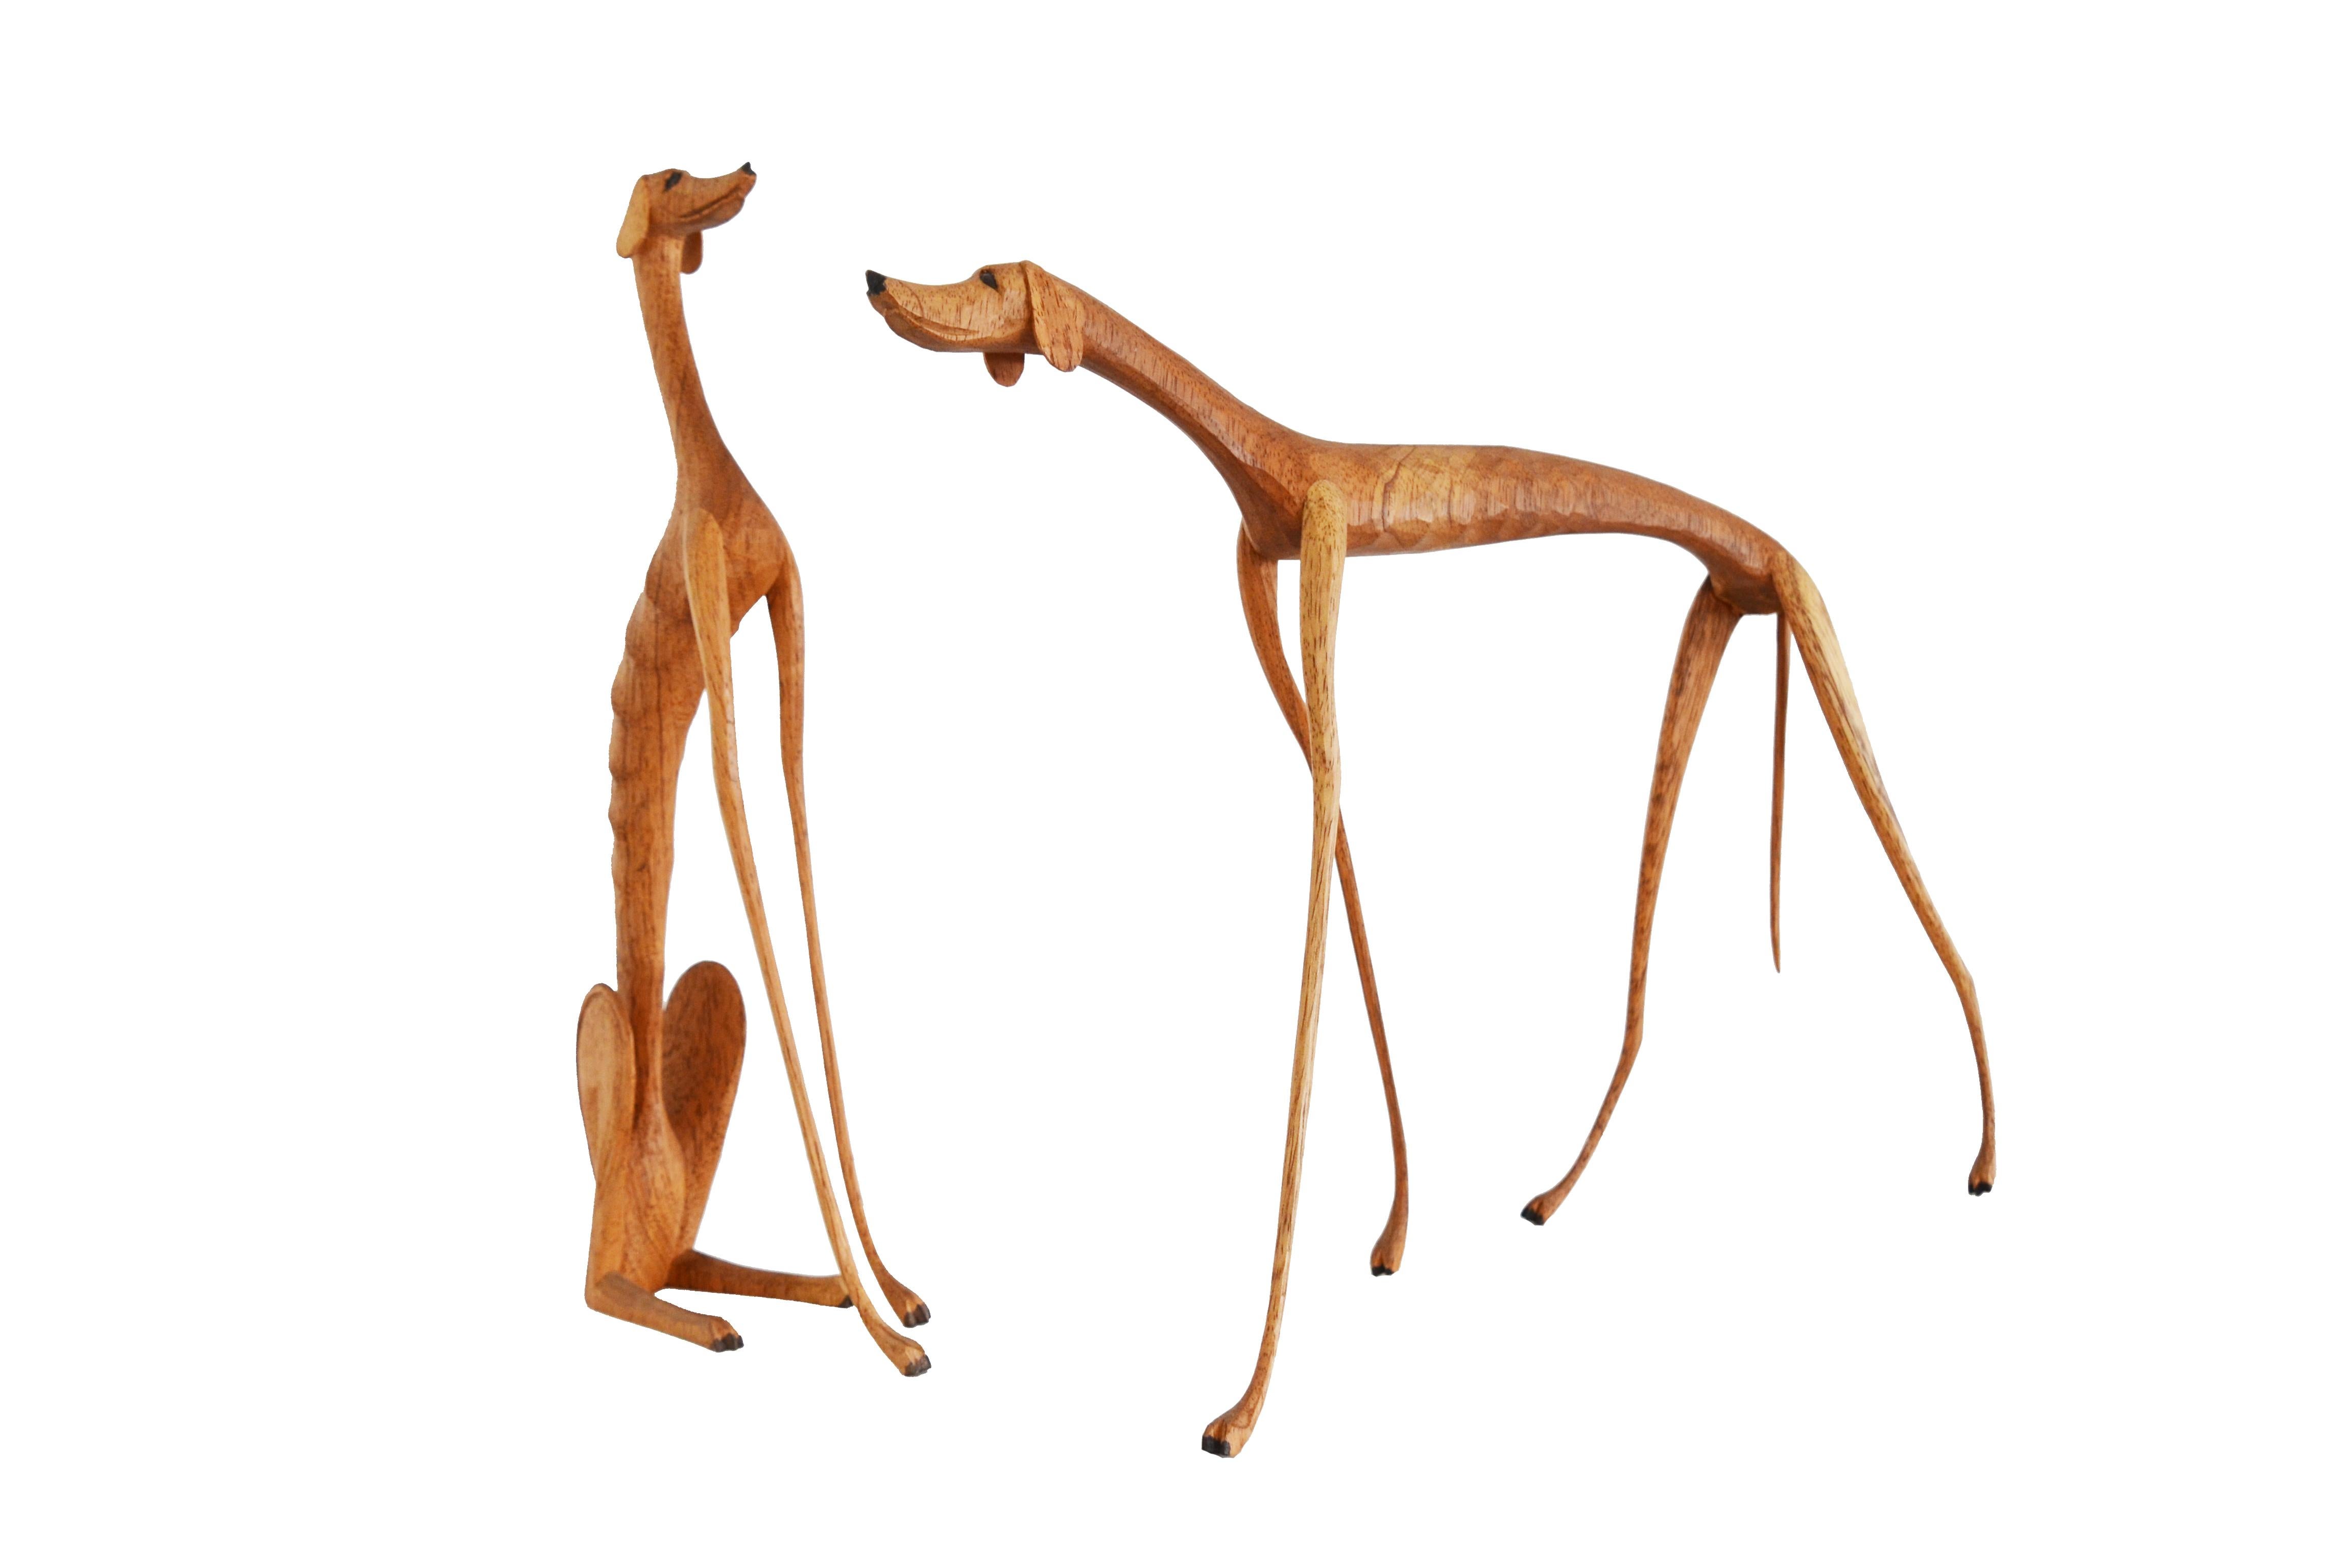 Brazilian Hand-Carved Wood Sculpture Dogs For Sale 7